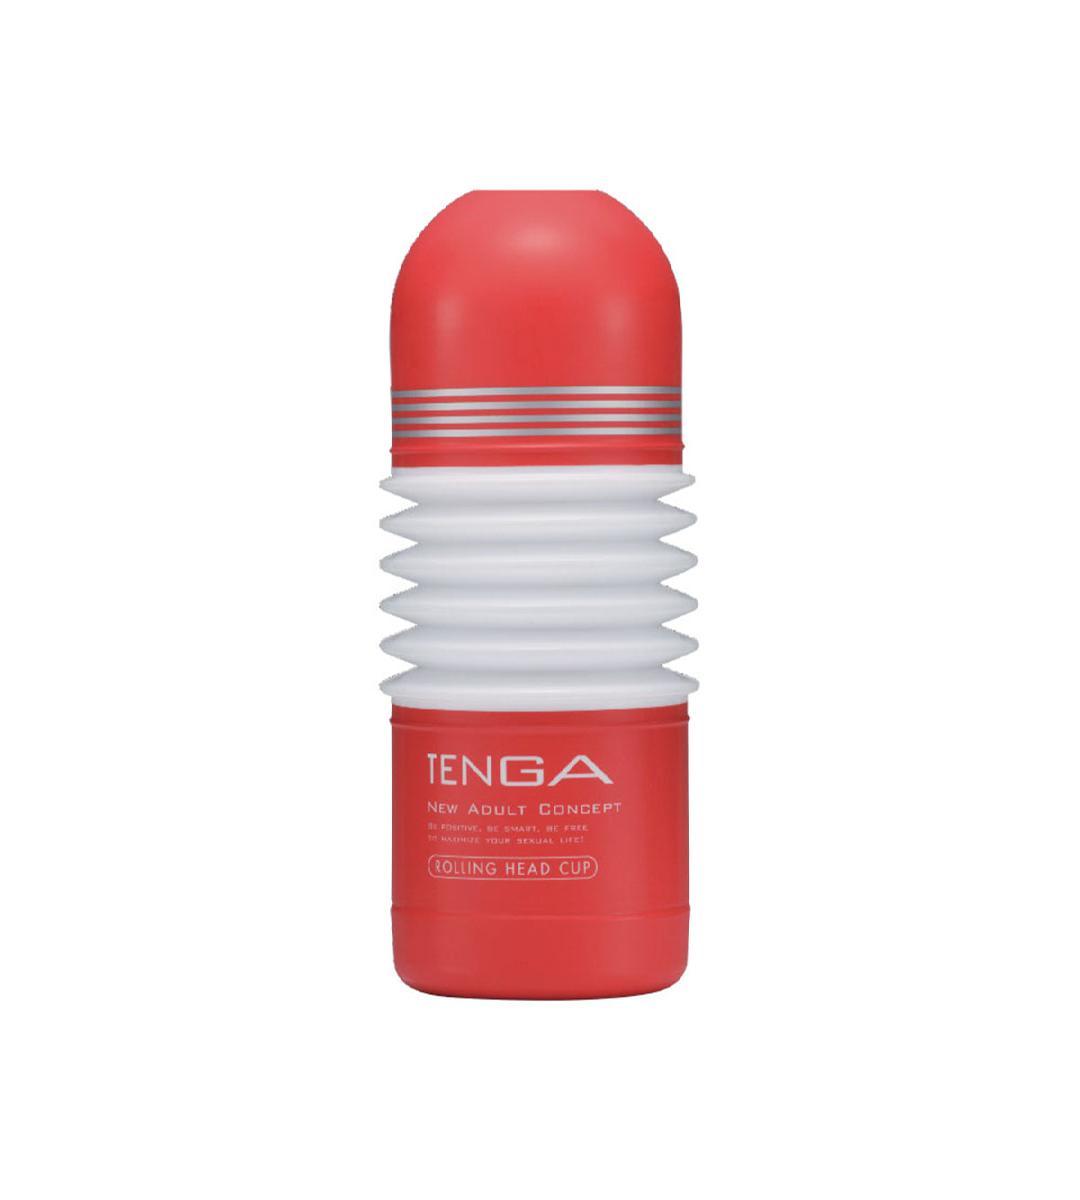 Tenga Standard Rolling Head Cup - Buy At Luxury Toy X - Free 3-Day Shipping